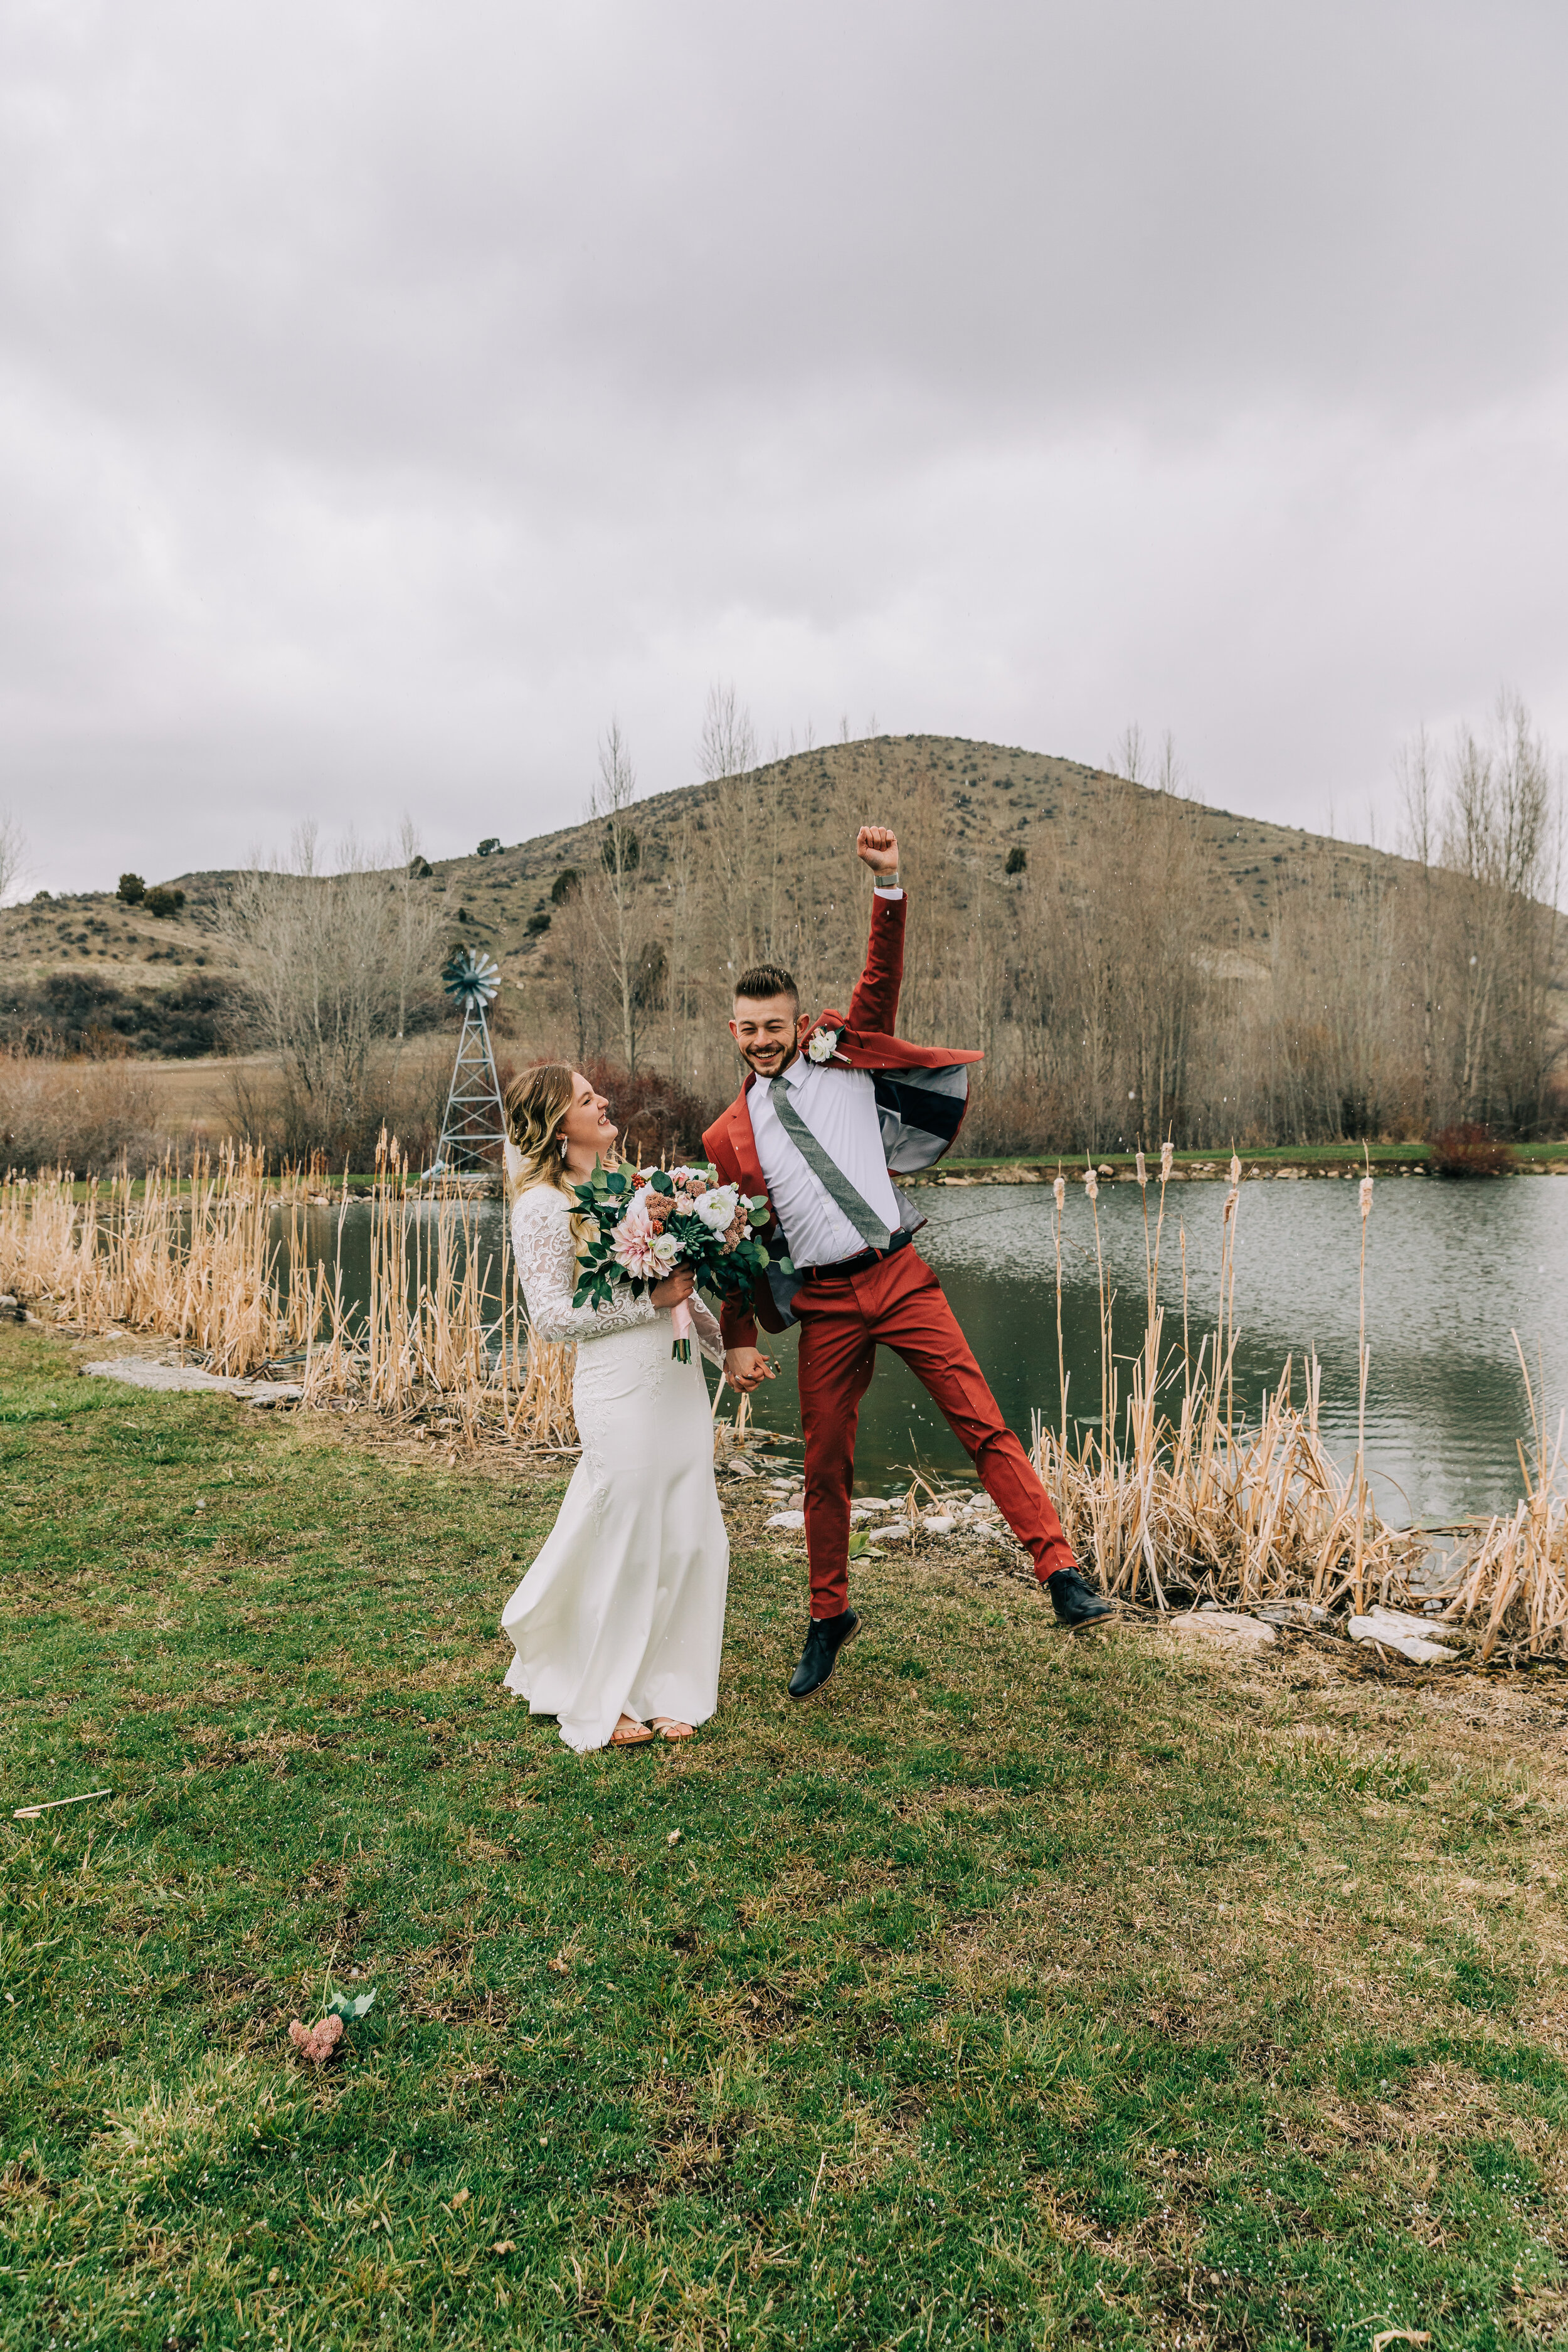  An excited groom jumping for joy by his stunning bride in a fun fall wedding. Preston, Idaho wedding elopement photographer inspiration ideas and goals for modern brides fun unique couple pose inspiration couple goals outdoor wedding inspiration out